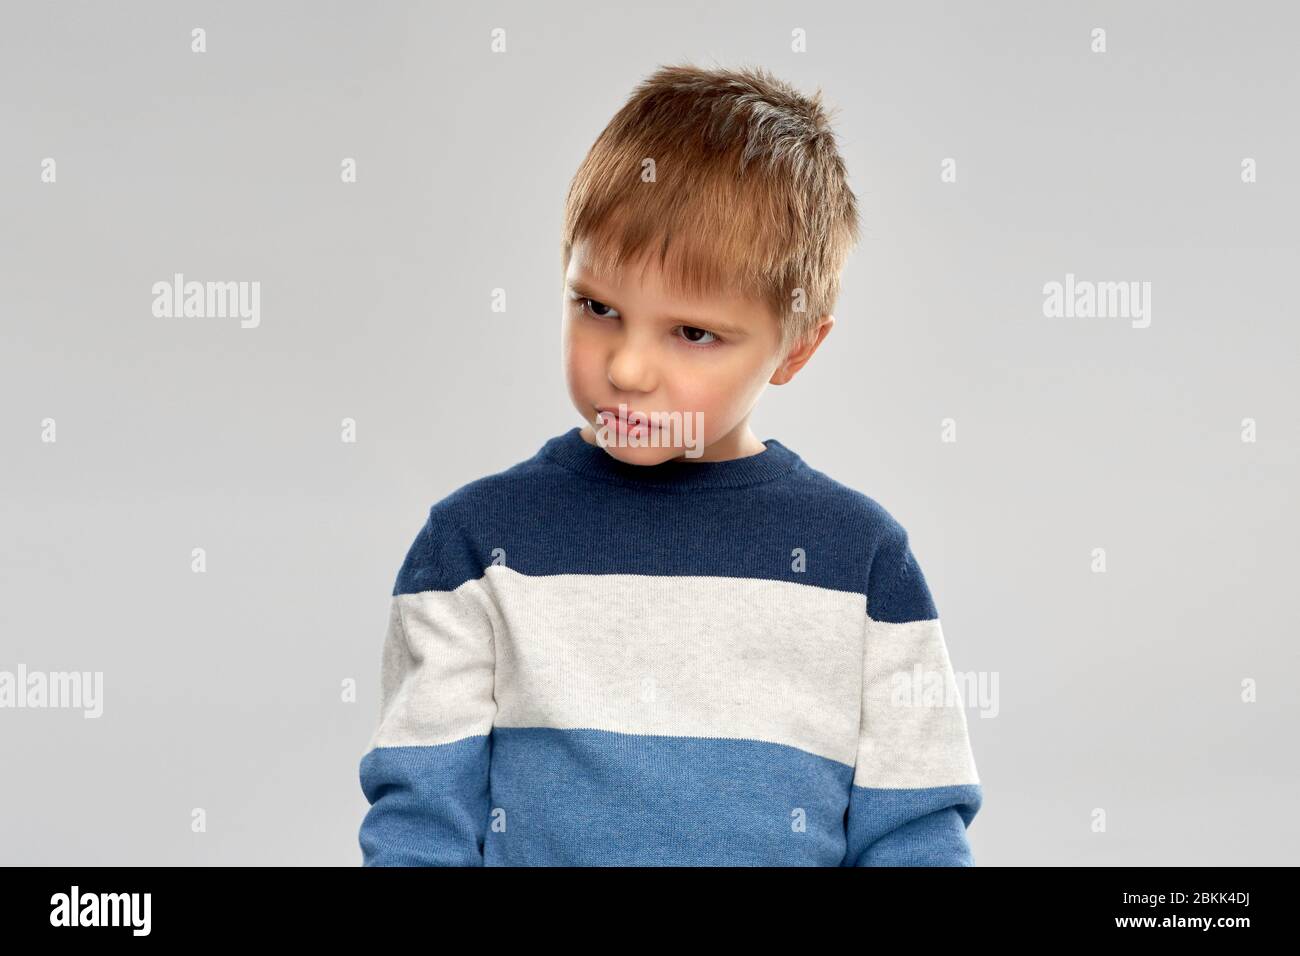 portrait of gloomy little boy in striped pullover Stock Photo